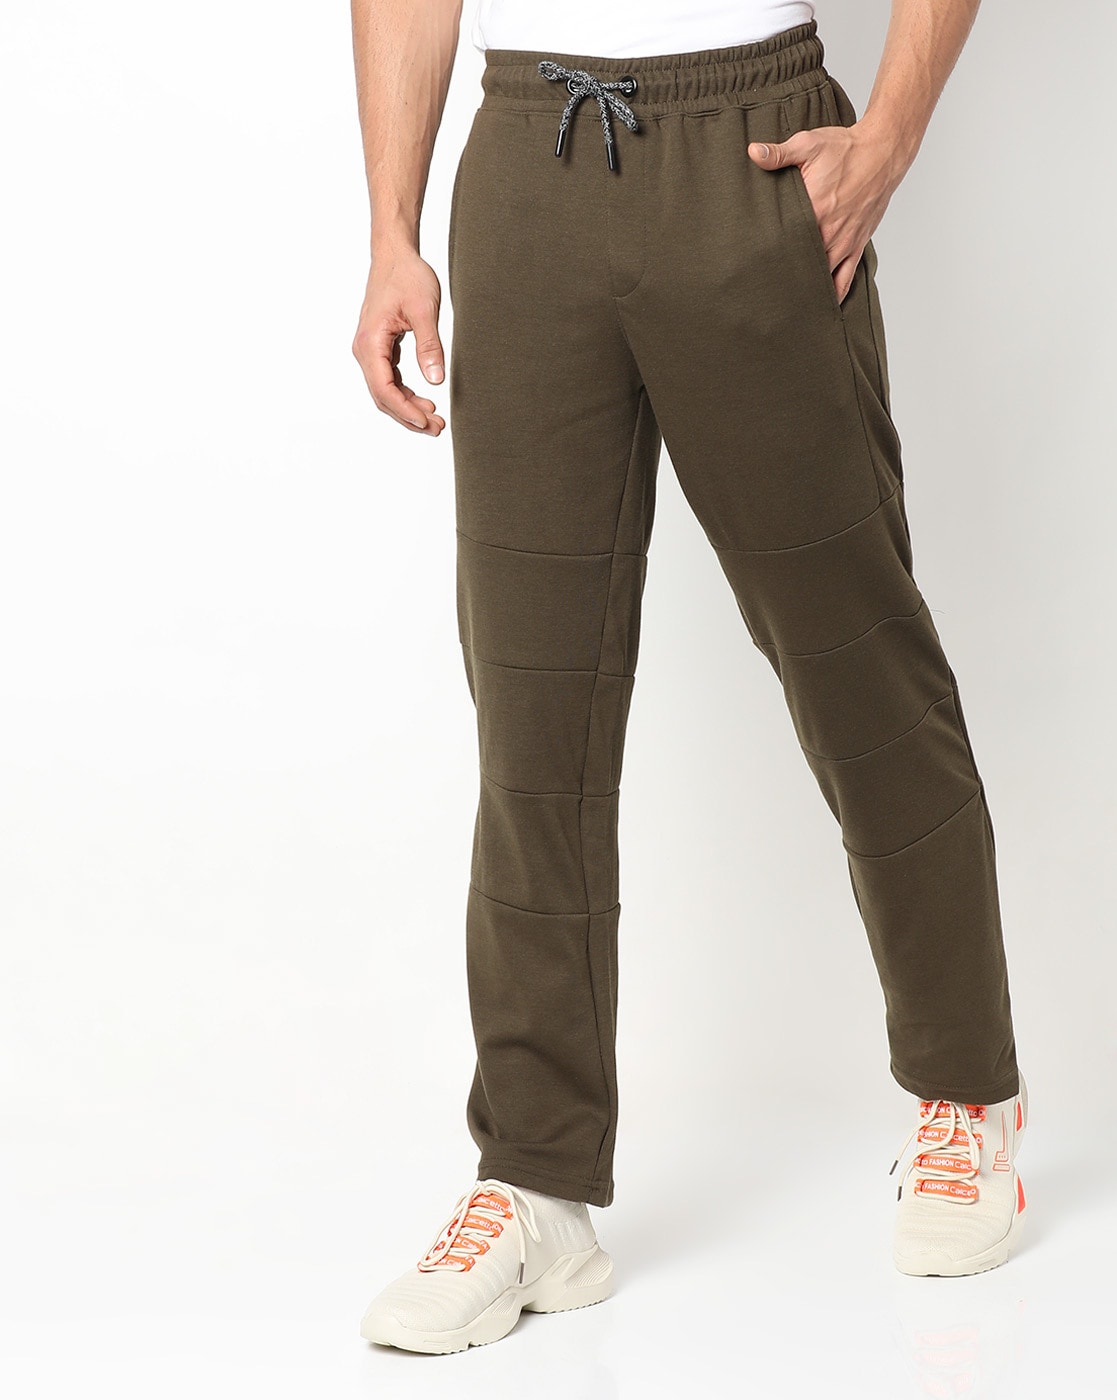 Buy Black Trousers  Pants for Men by FIRST CLASS Online  Ajiocom